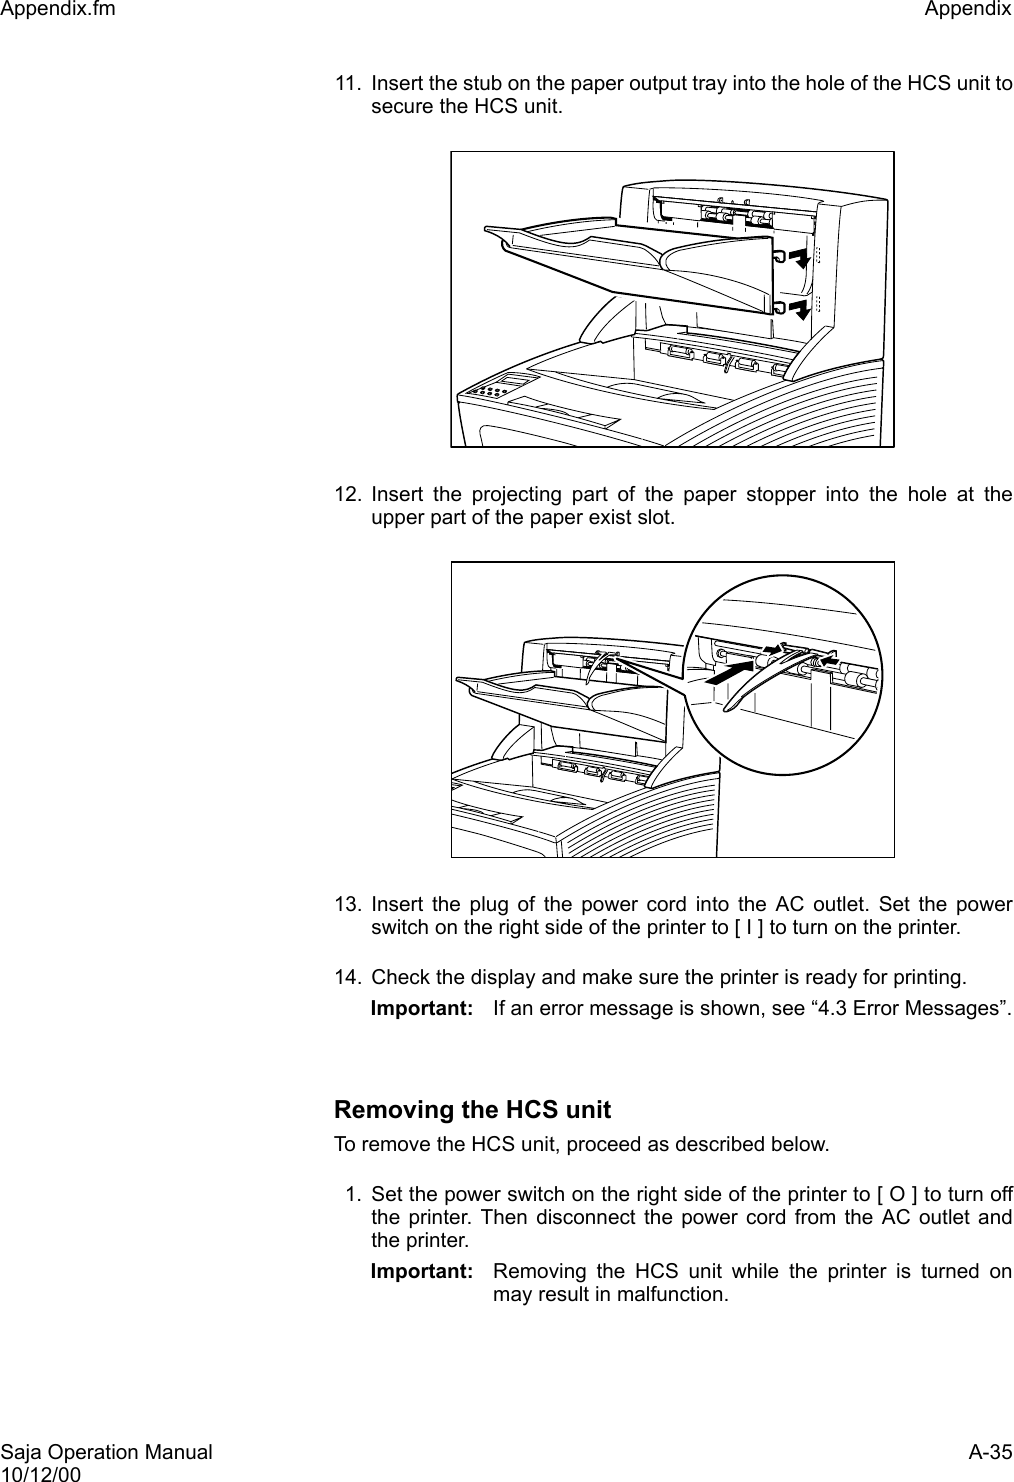 Saja Operation Manual A-3510/12/00Appendix.fm Appendix 11. Insert the stub on the paper output tray into the hole of the HCS unit tosecure the HCS unit.12. Insert the projecting part of the paper stopper into the hole at theupper part of the paper exist slot.13. Insert the plug of the power cord into the AC outlet. Set the powerswitch on the right side of the printer to [ I ] to turn on the printer.14. Check the display and make sure the printer is ready for printing.Important: If an error message is shown, see “4.3 Error Messages”.Removing the HCS unitTo remove the HCS unit, proceed as described below. 1. Set the power switch on the right side of the printer to [ O ] to turn offthe printer. Then disconnect the power cord from the AC outlet andthe printer. Important: Removing the HCS unit while the printer is turned onmay result in malfunction.